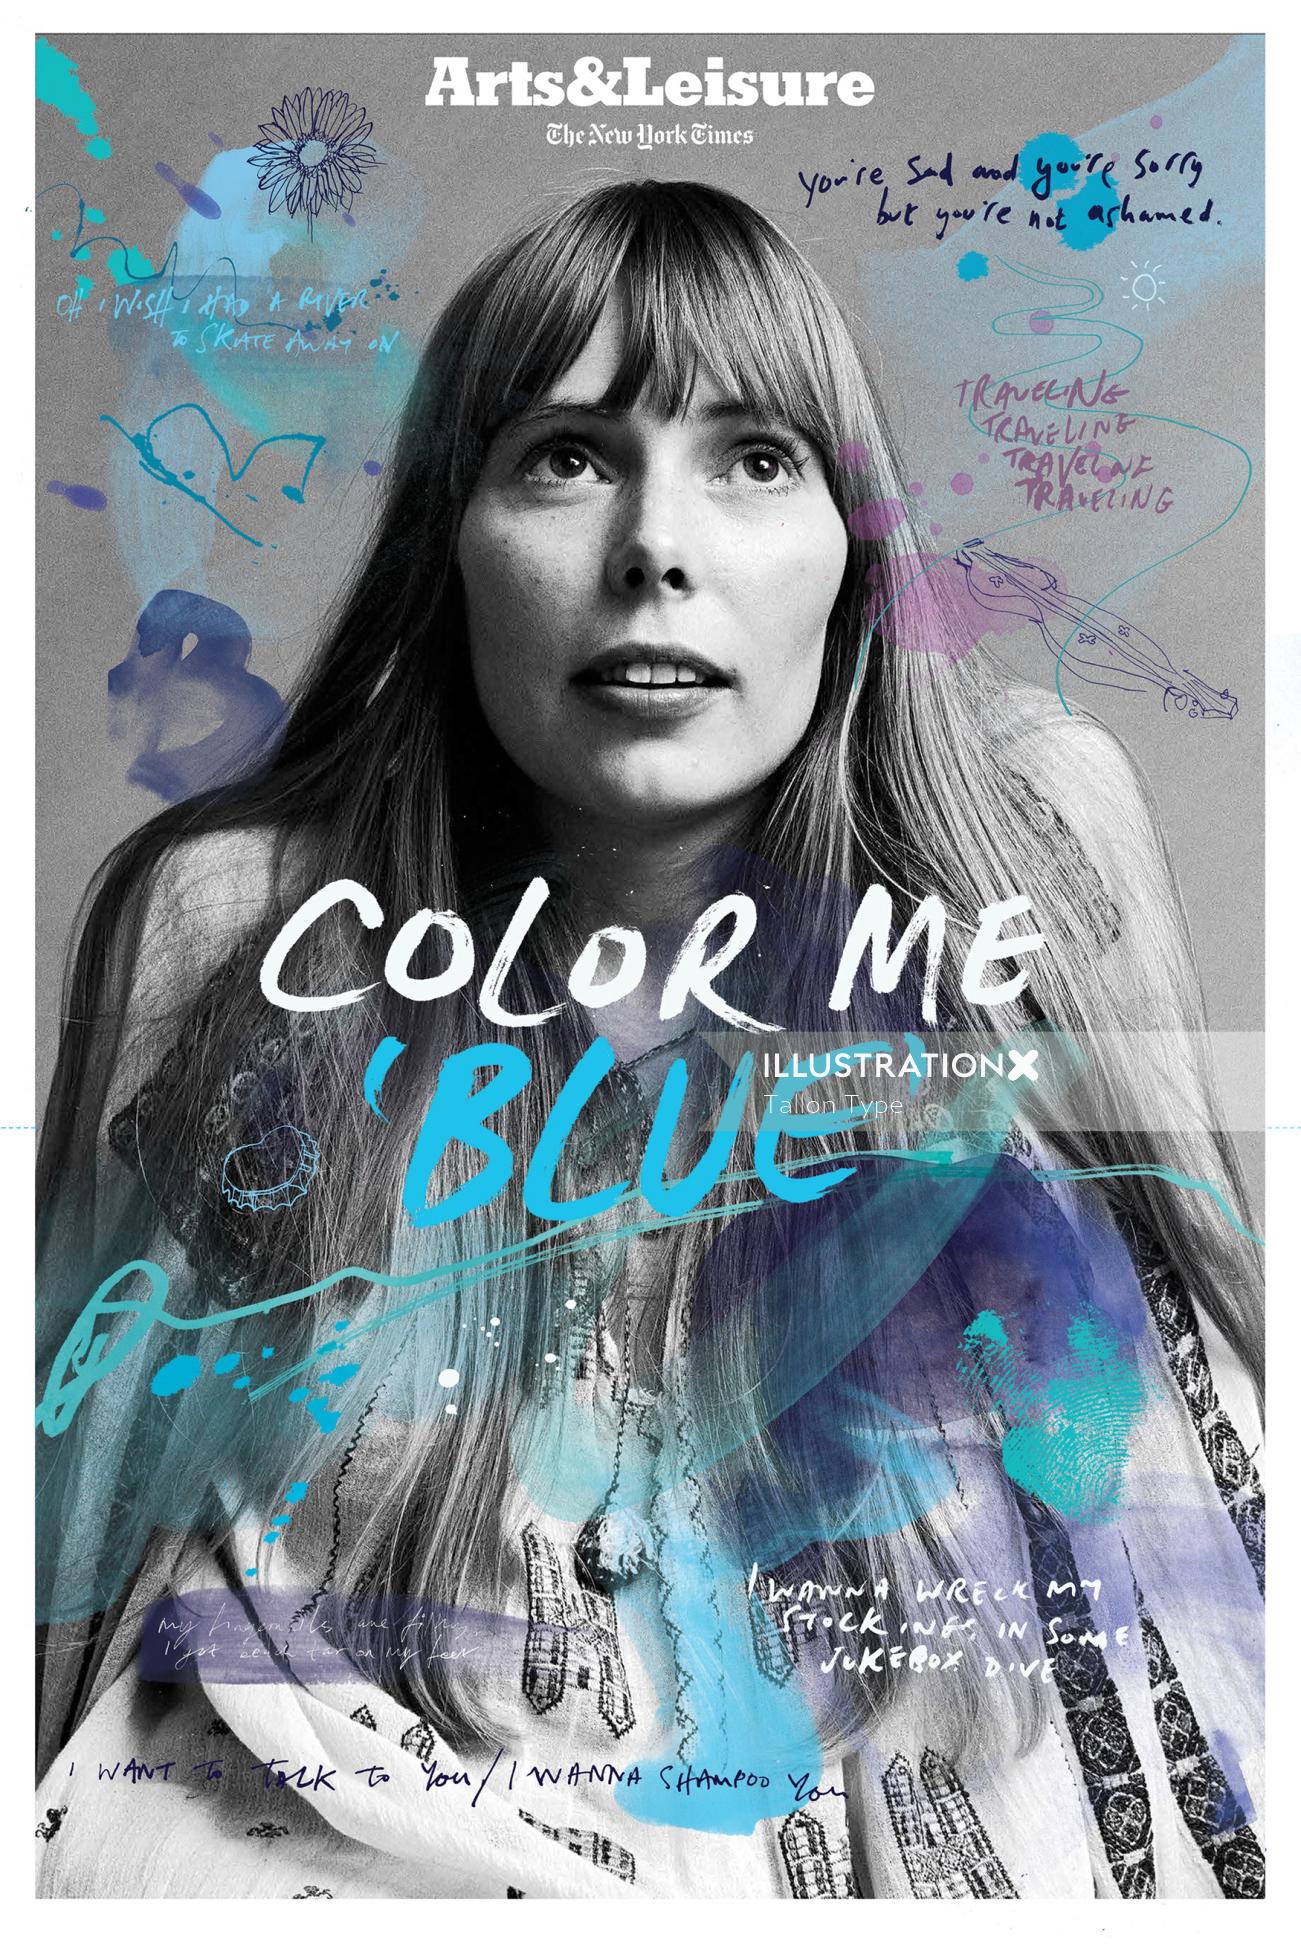 New York Times front cover for Blue album 50th anniversary celebrations.